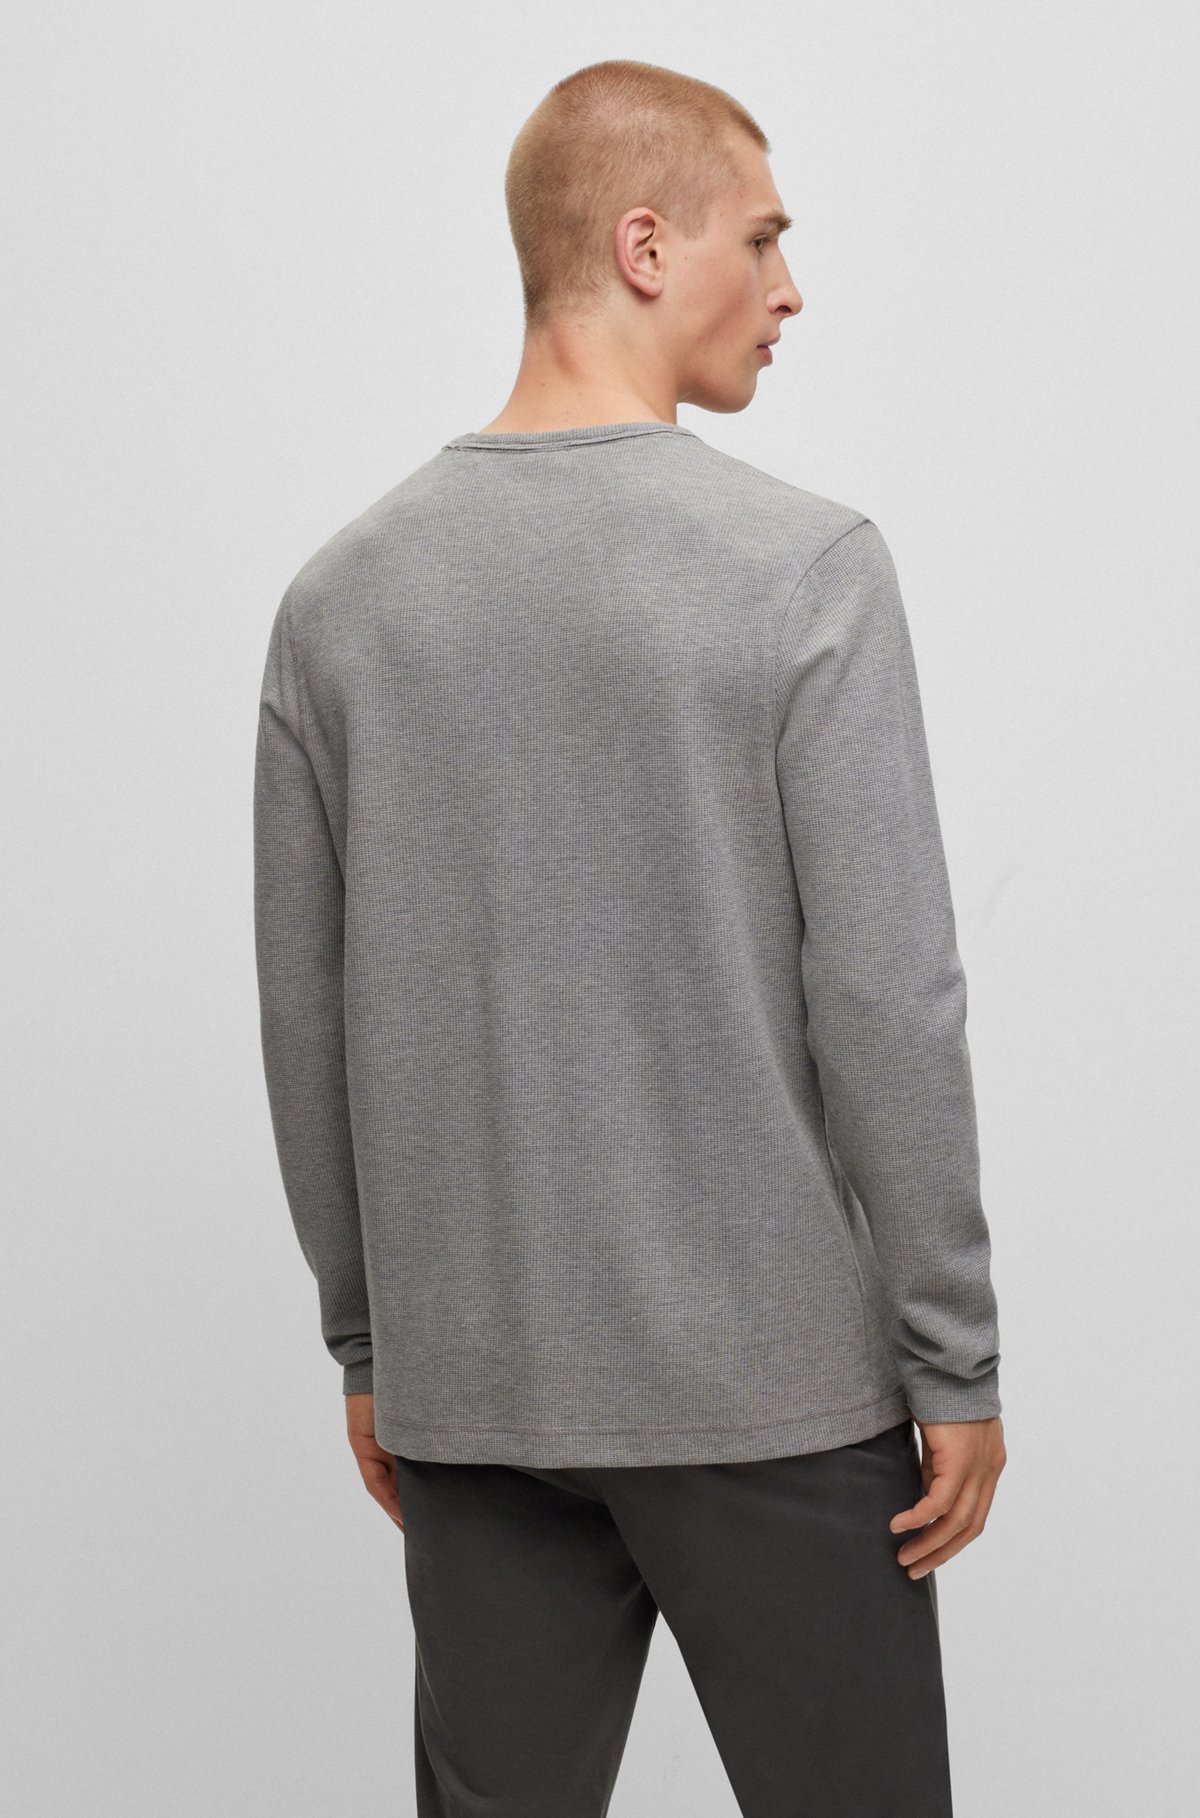 Long-sleeved T-shirt in a waffle-structured cotton blend, Grey